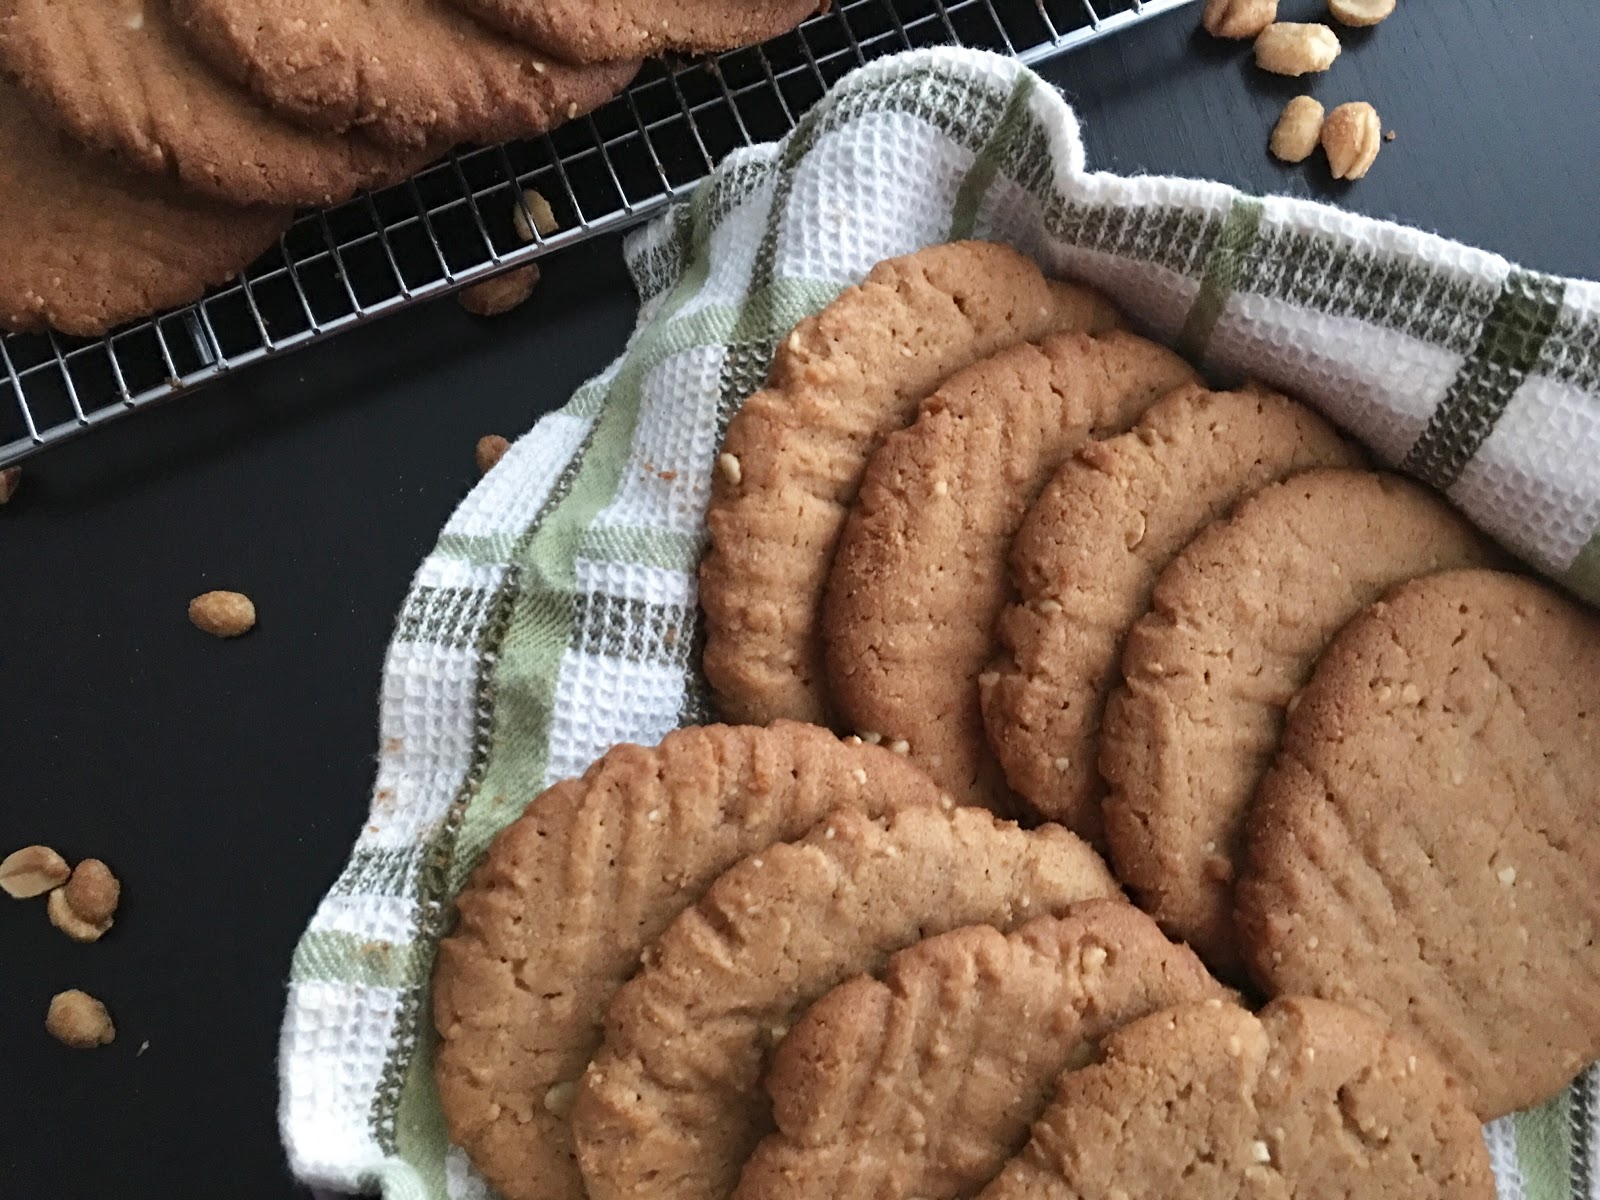 Fueling with Flavour: Honey Roasted Peanut Butter Cookies